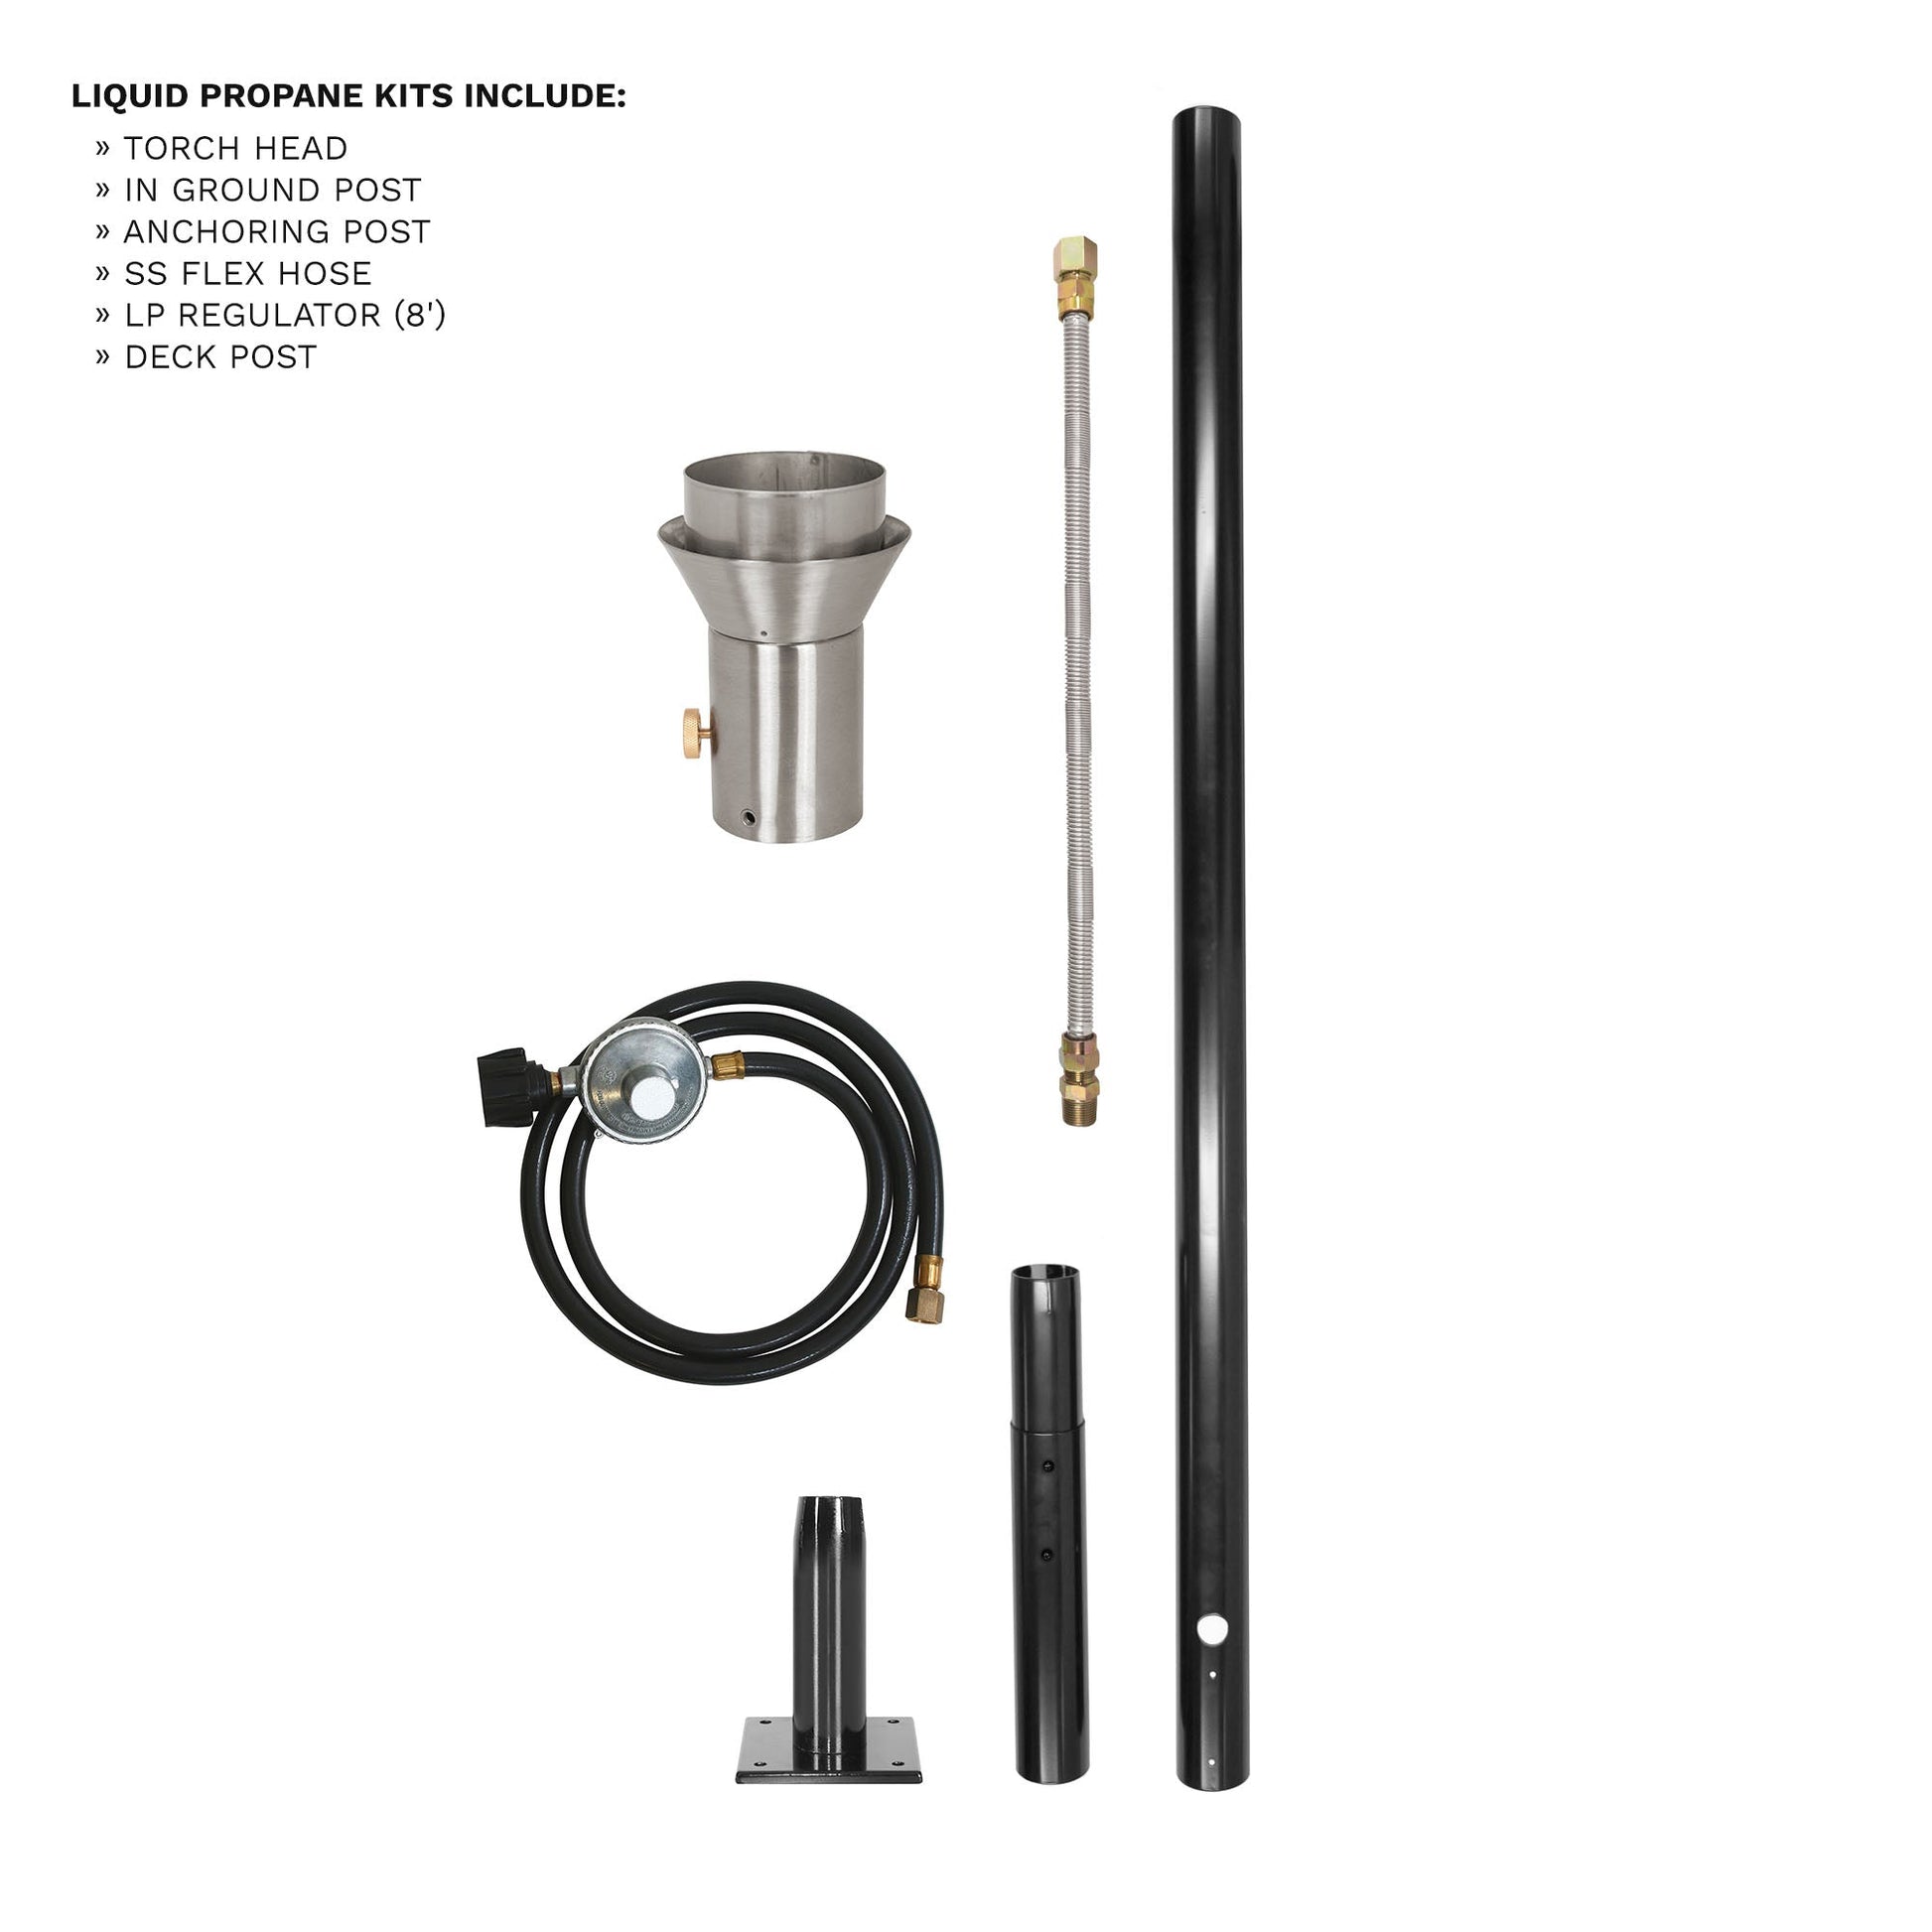 Honeycomb Original TOP Torch & Post Complete Kit - Stainless Steel - Liquid Propane-Novel Home